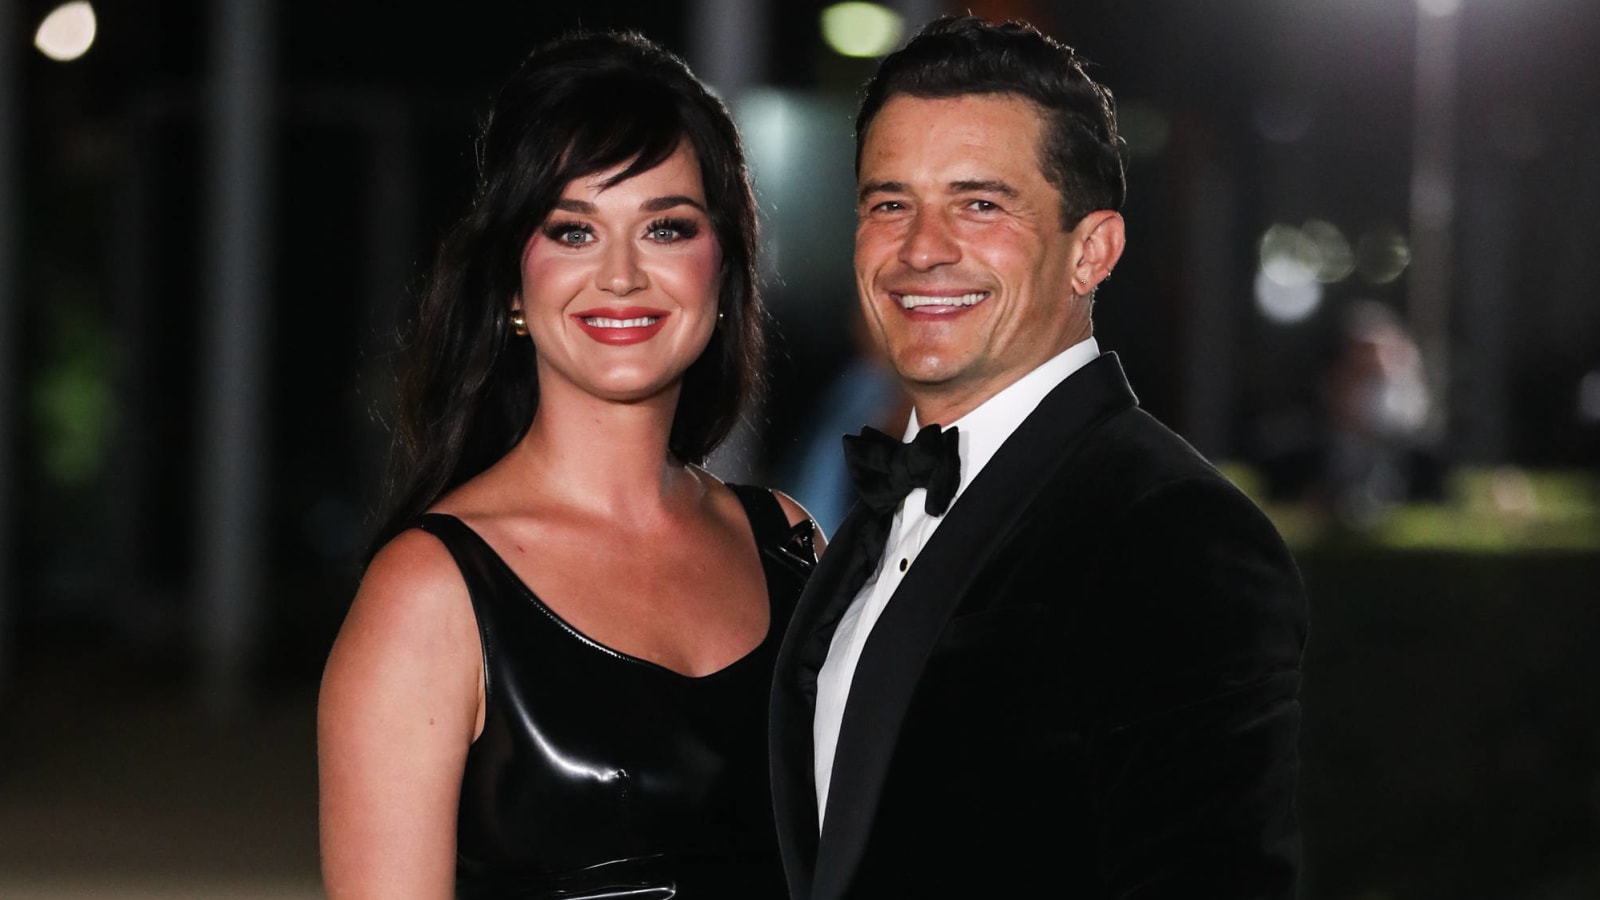 Orlando Bloom shares sweet birthday tribute for Katy Perry